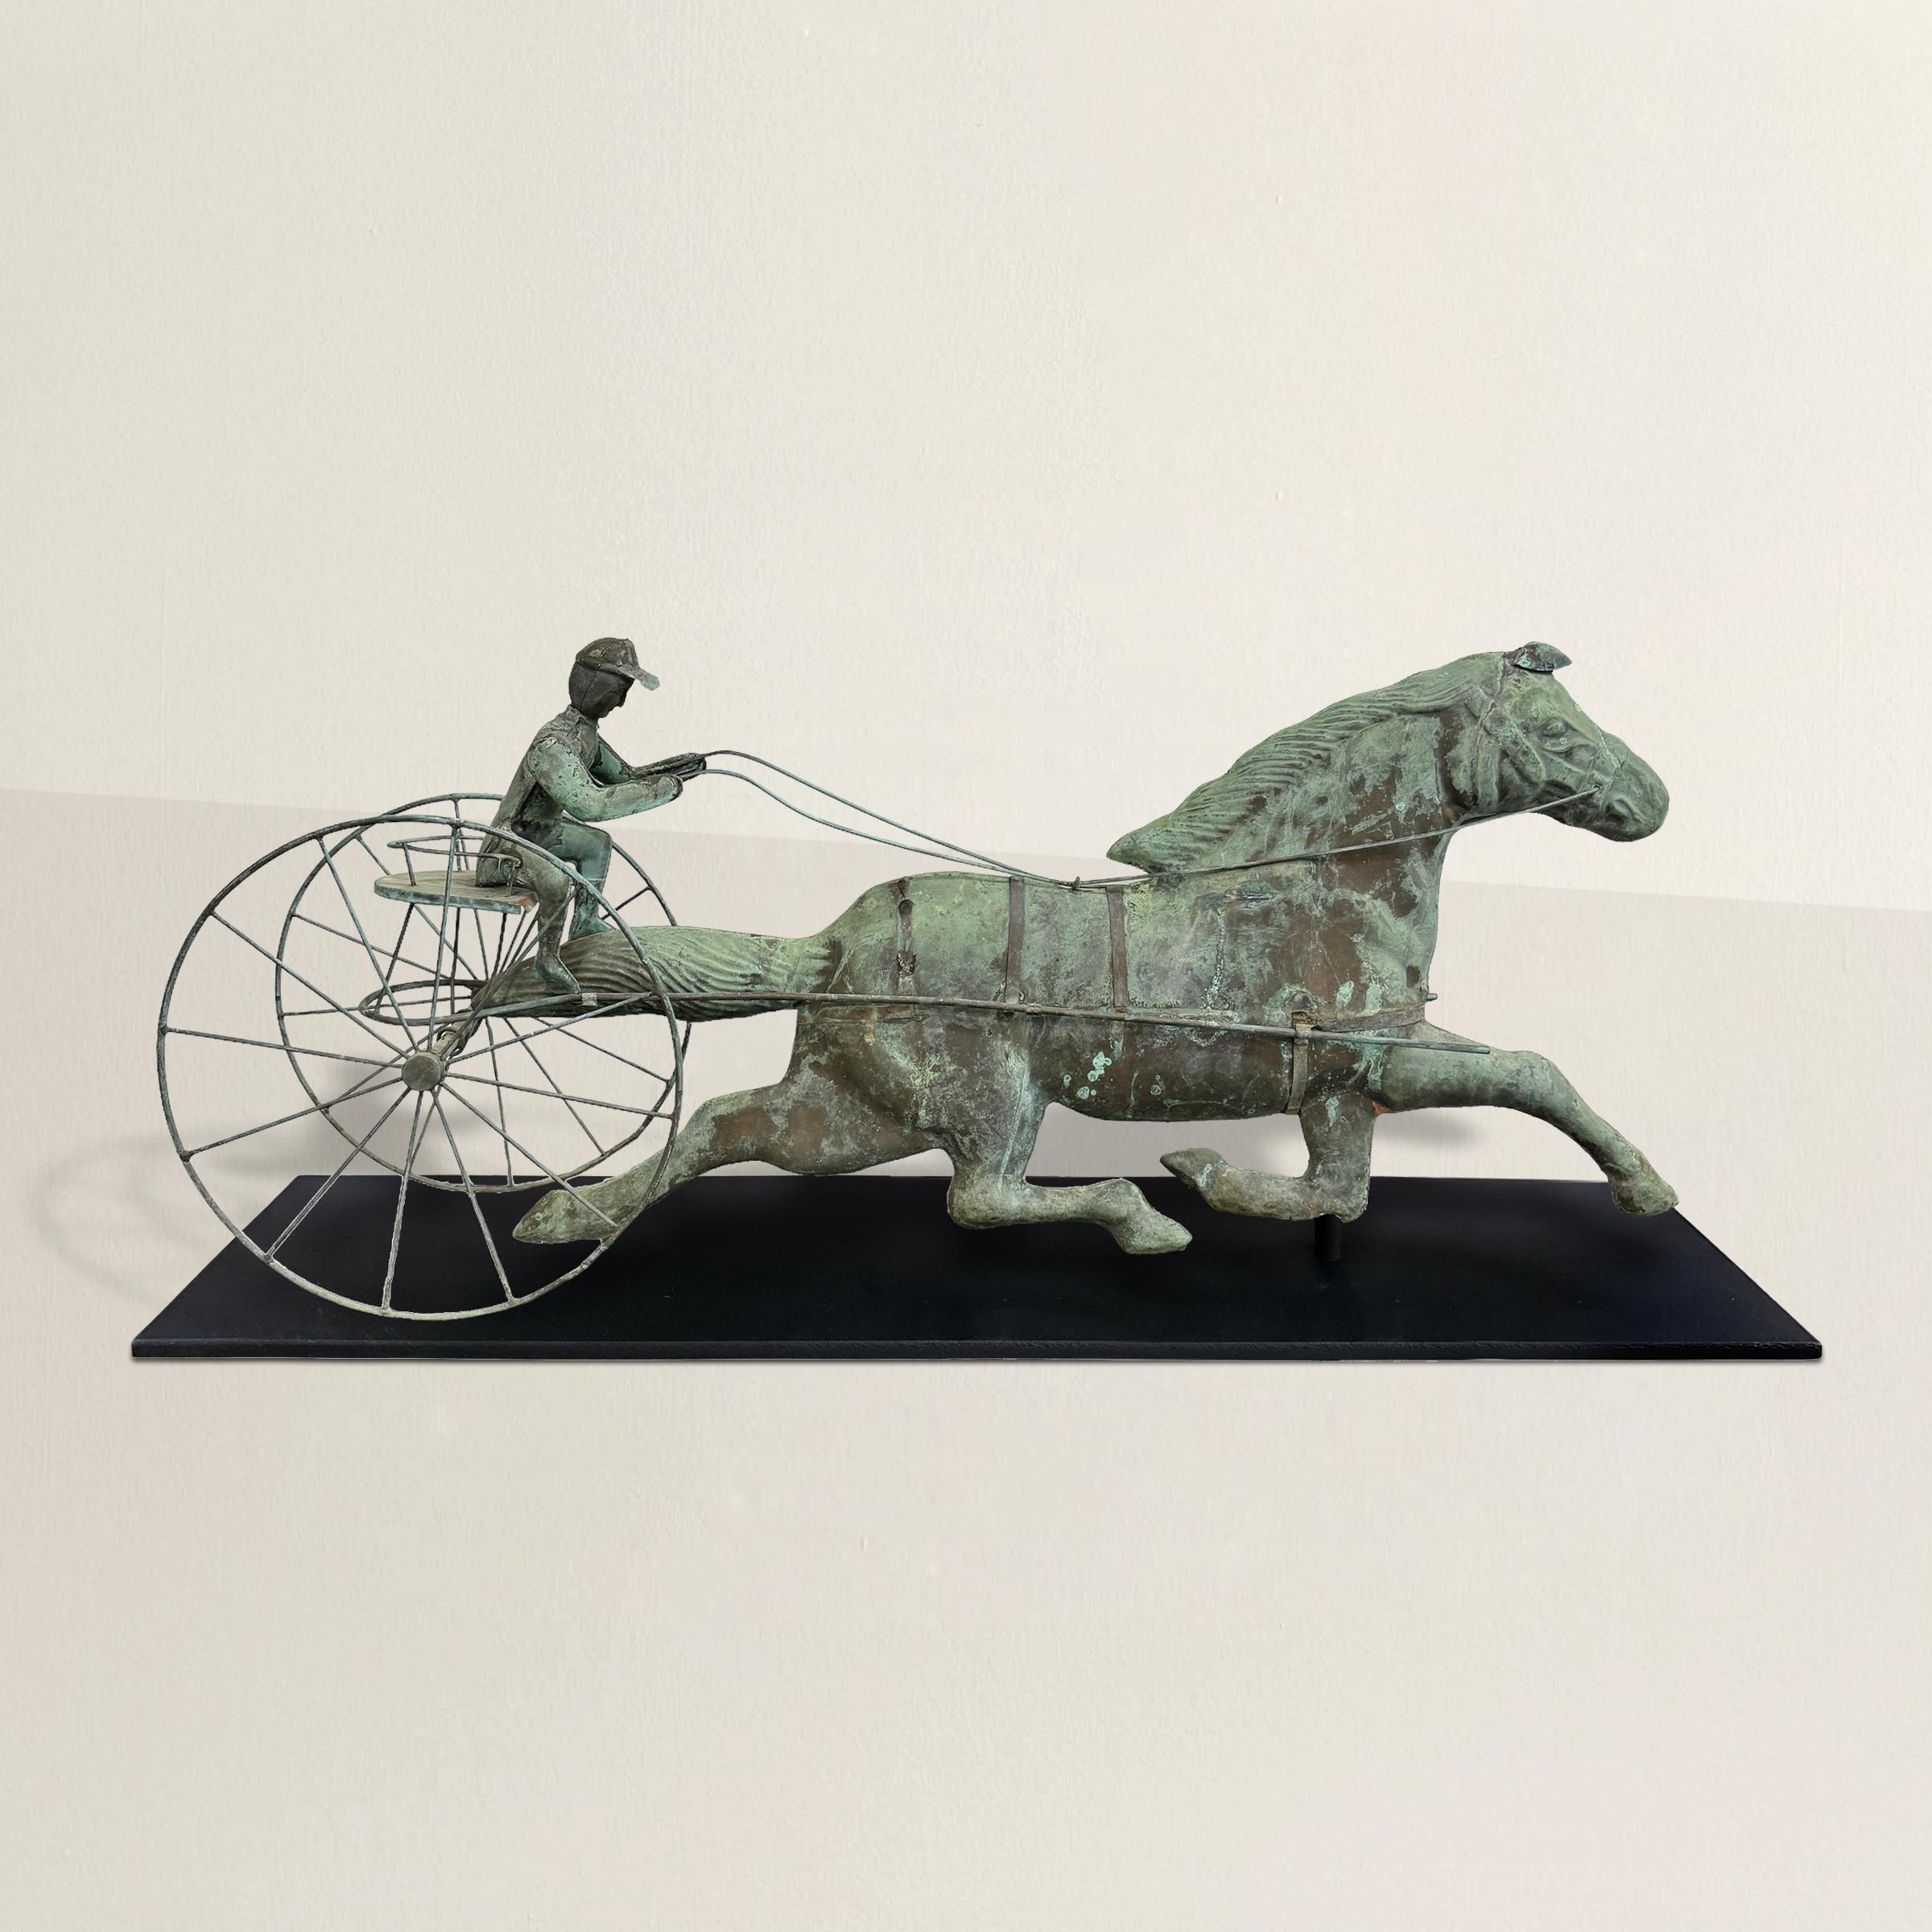 This exquisite 1920s American copper weathervane, found in Connecticut, features a captivating depiction of a Patchen horse with a sulky and rider, emblematic of the era's folk art tradition. Enhanced by a splendid verdigris patina acquired over